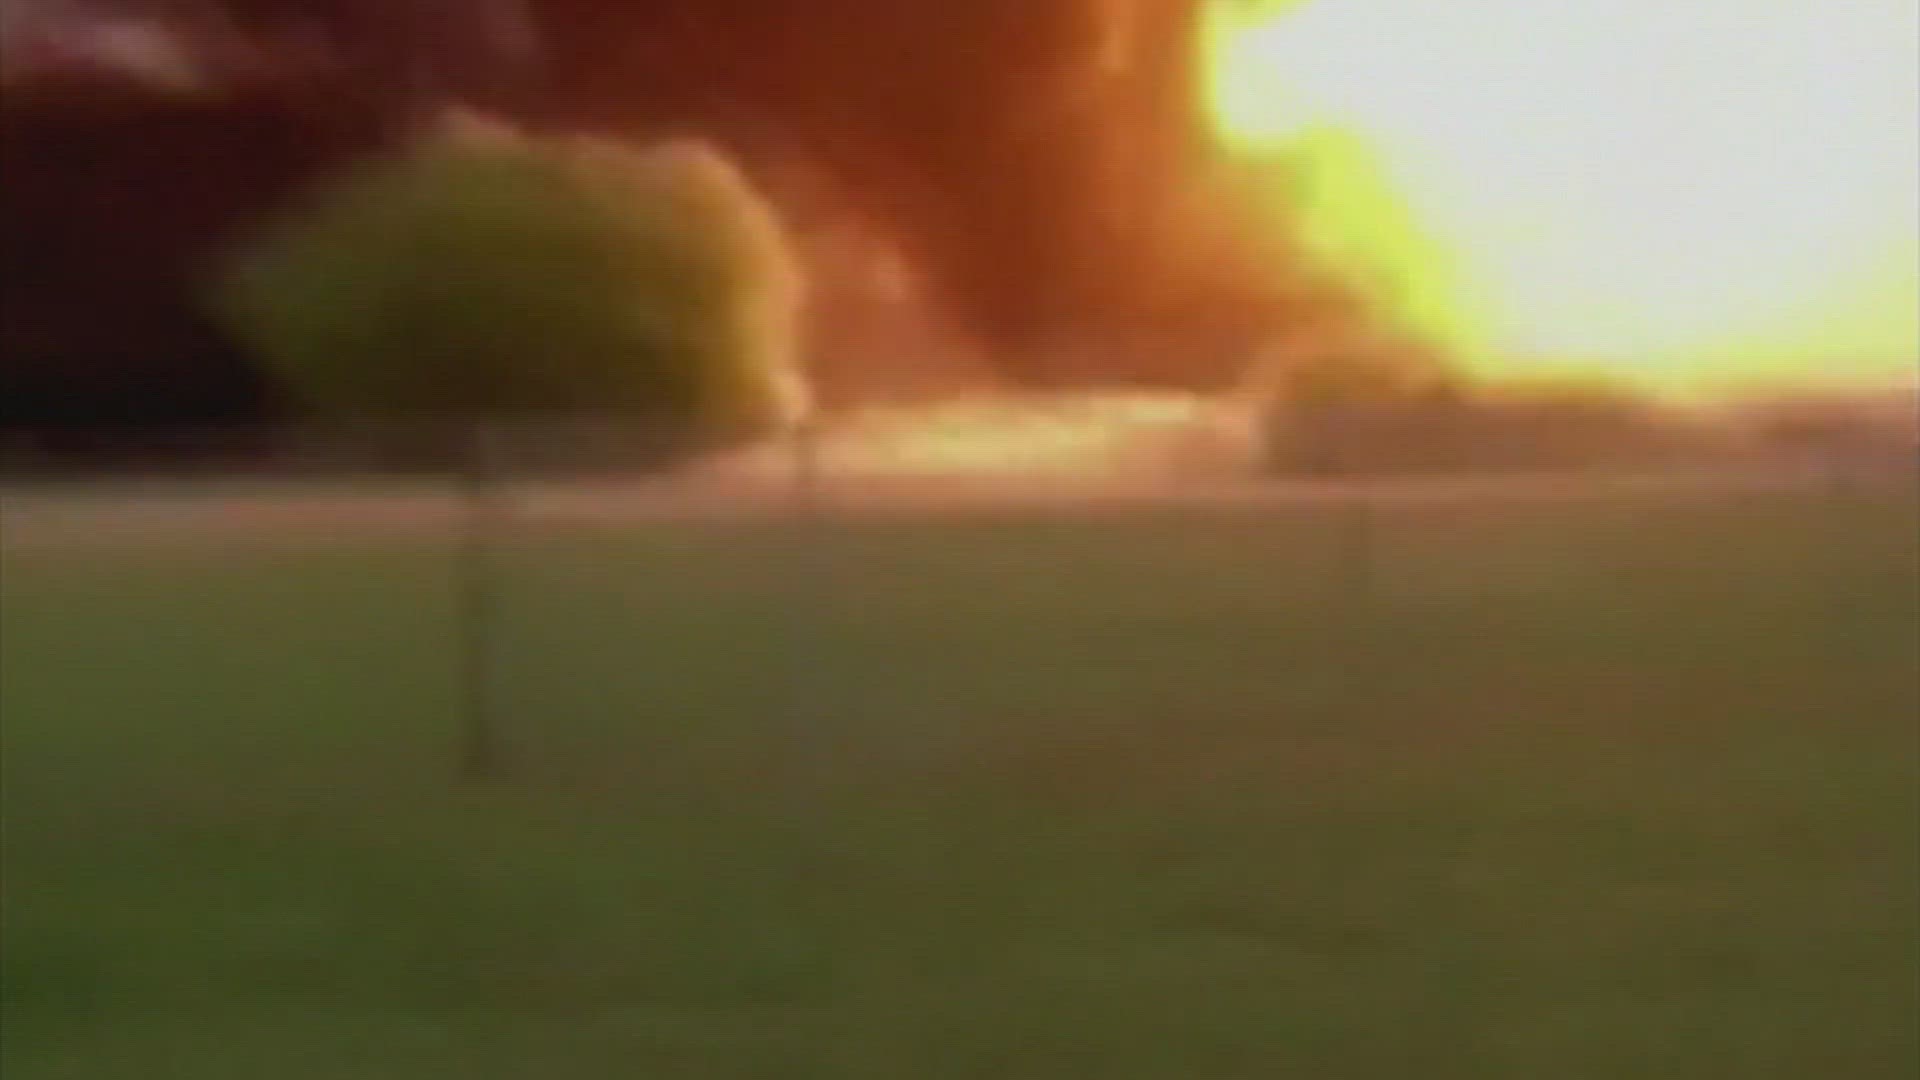 The 2013 explosion killed 15 people. WFAA will hear from one resident that was injured.